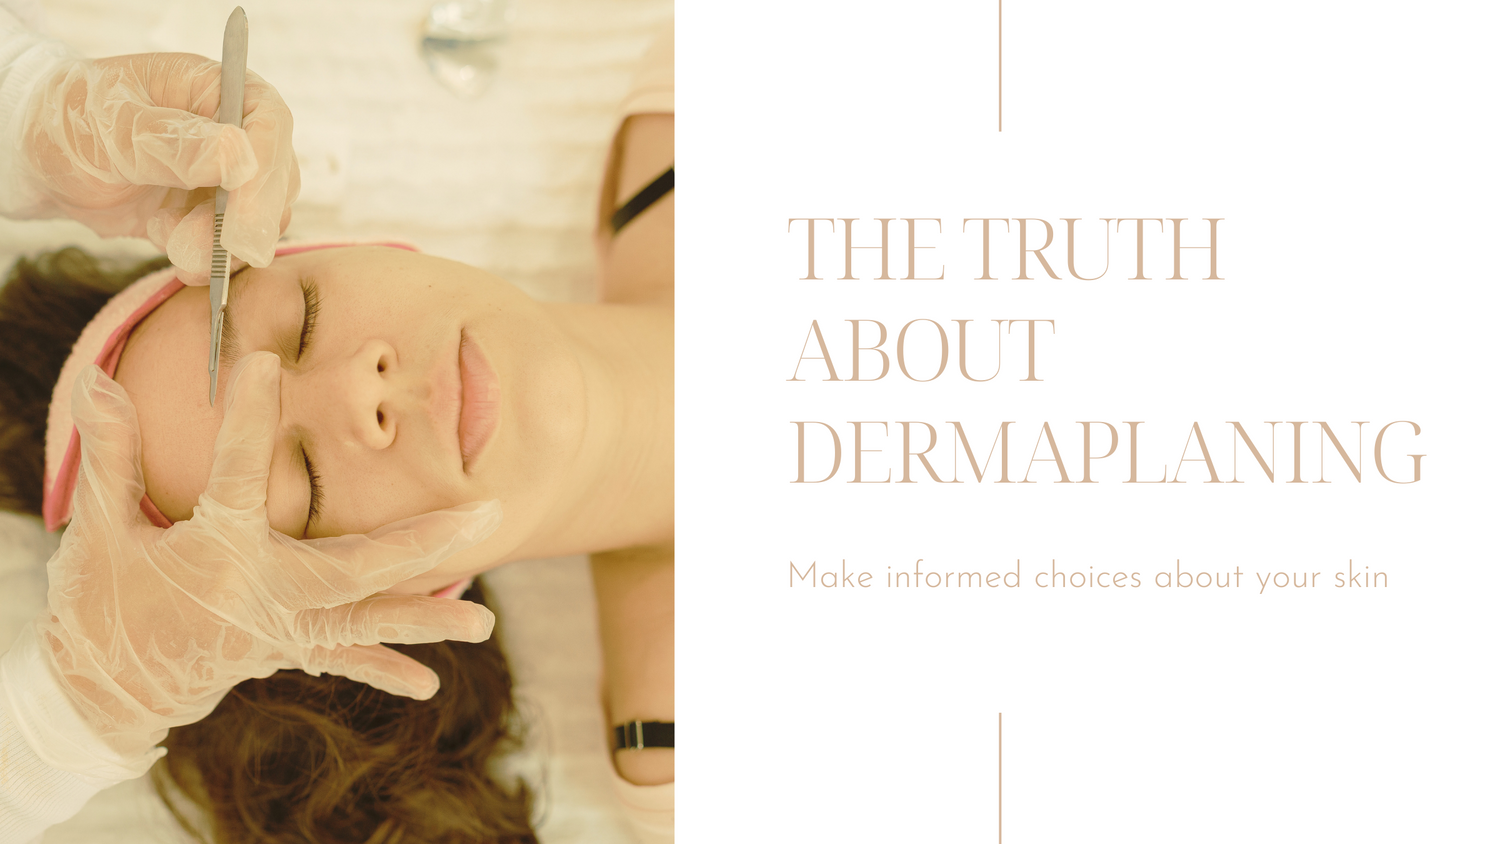 THE TRUTH ABOUT DERMAPLANING